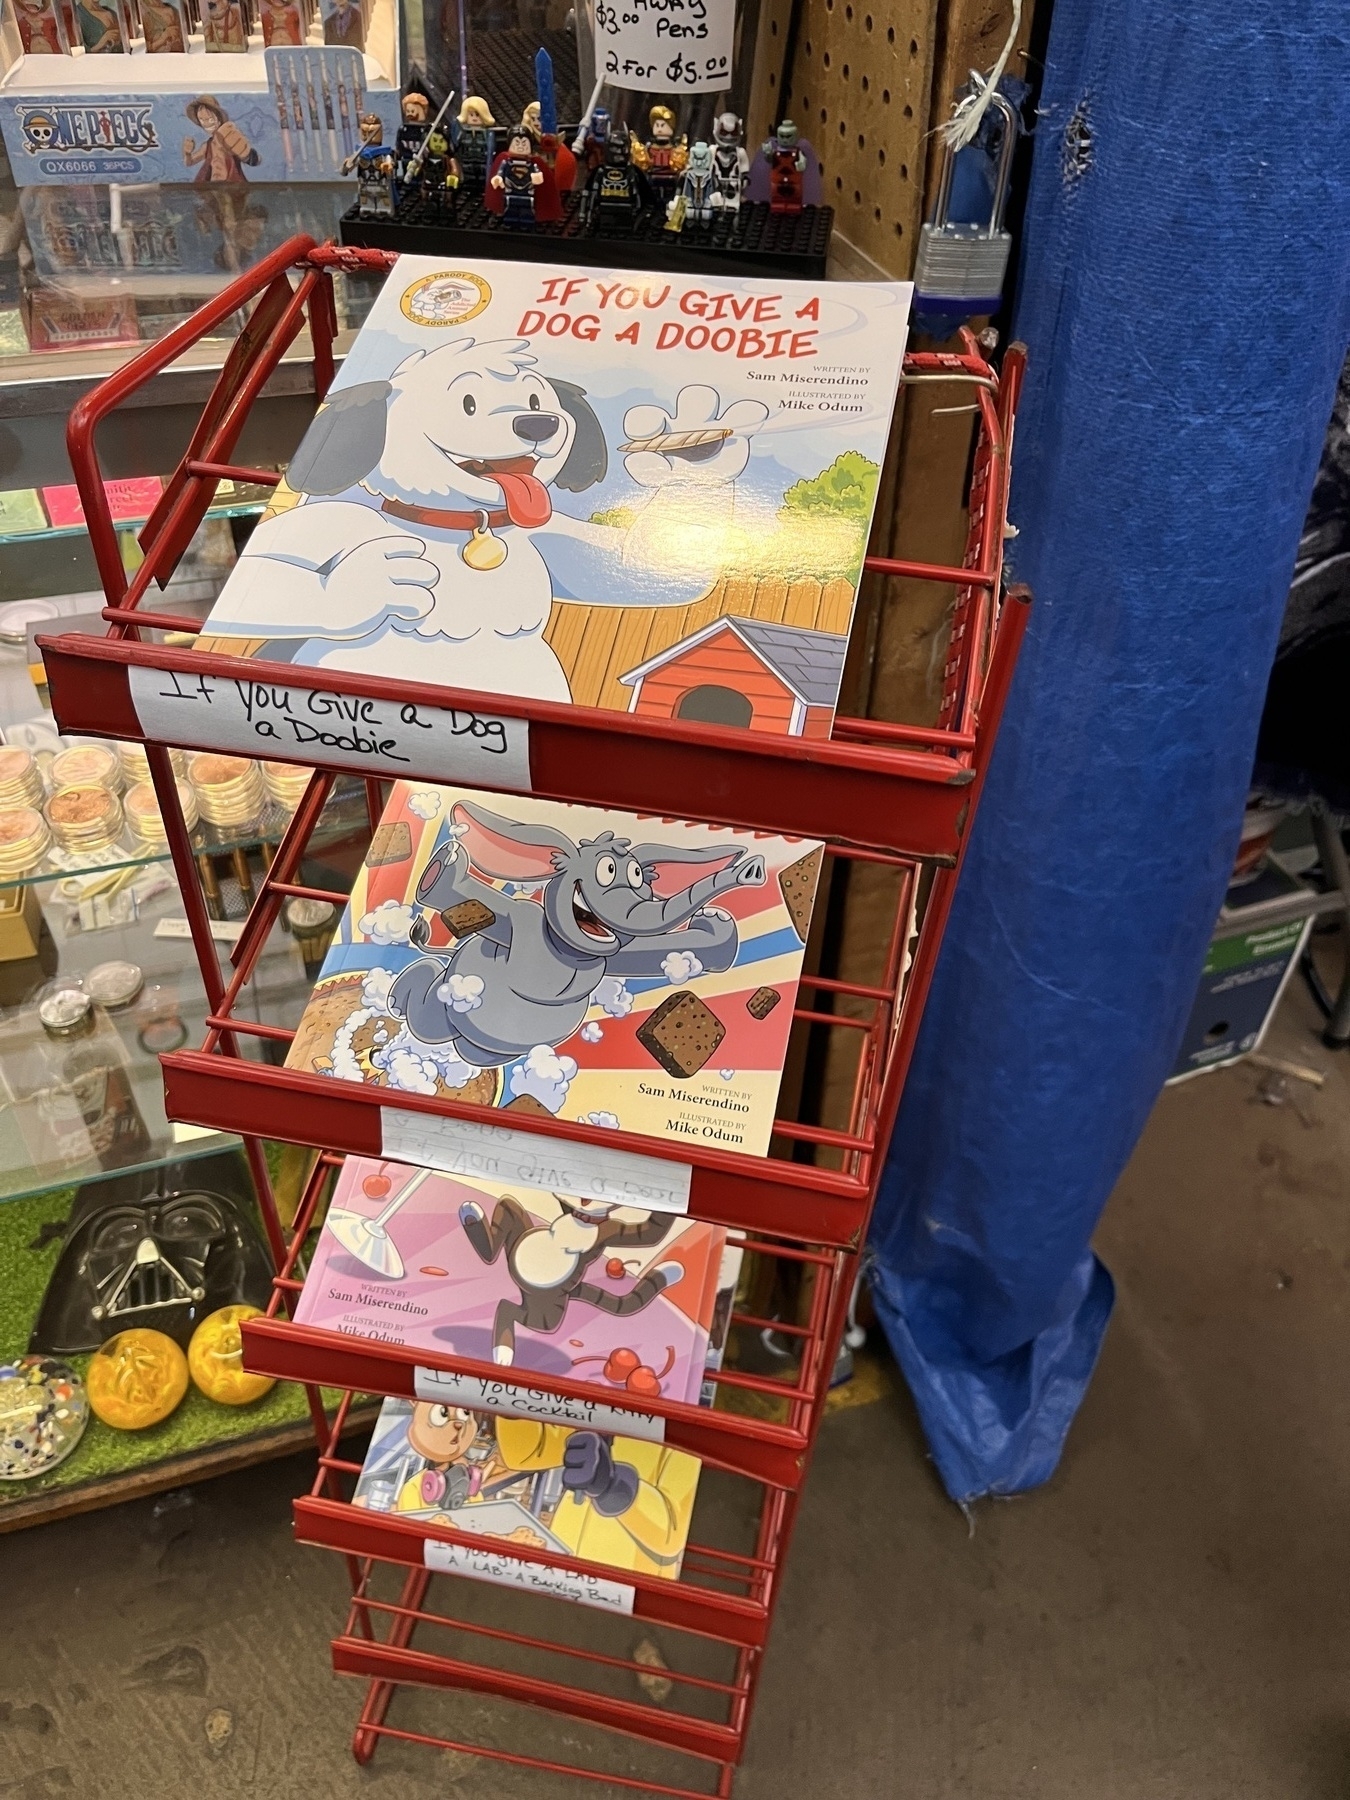 A rack of magazines, the top one being a children’s book called “If you give a dog a doobie”. It pictures a cartoon dog holding a joint. 